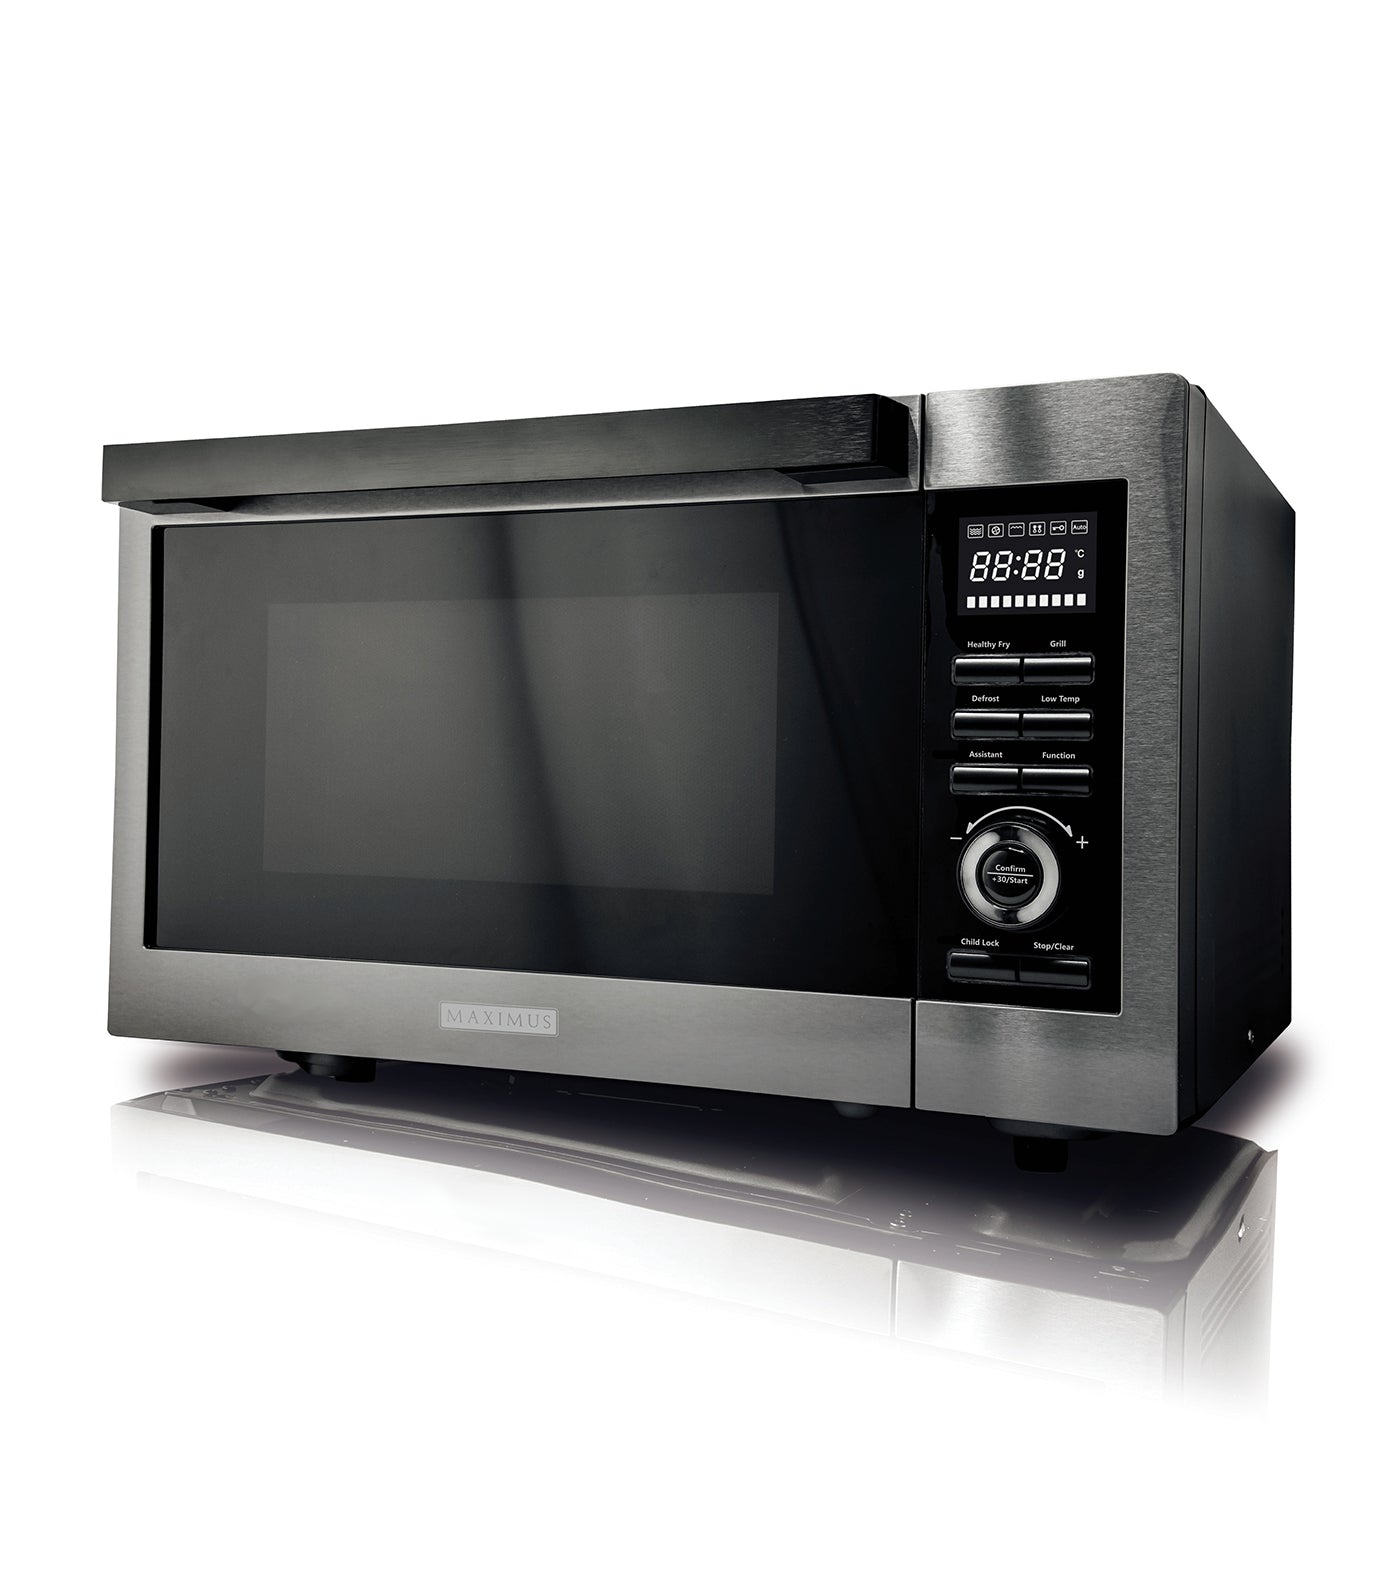 TÄNGBY Fan Convection Wall Oven self-clean, Stainless steel - IKEA